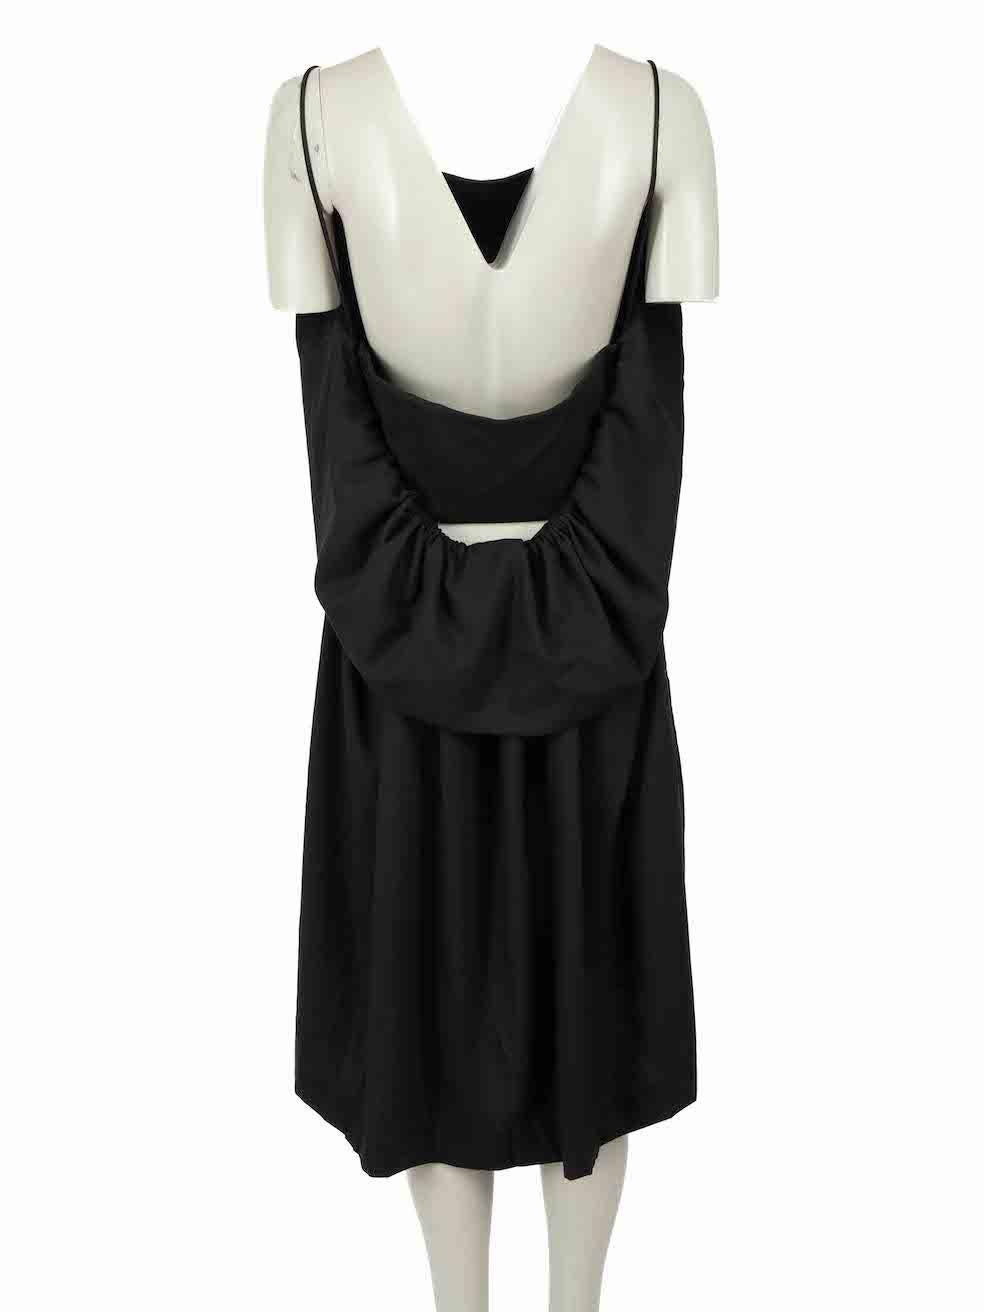 Balenciaga Black Wool Draped Detail Dress Size L In Excellent Condition For Sale In London, GB